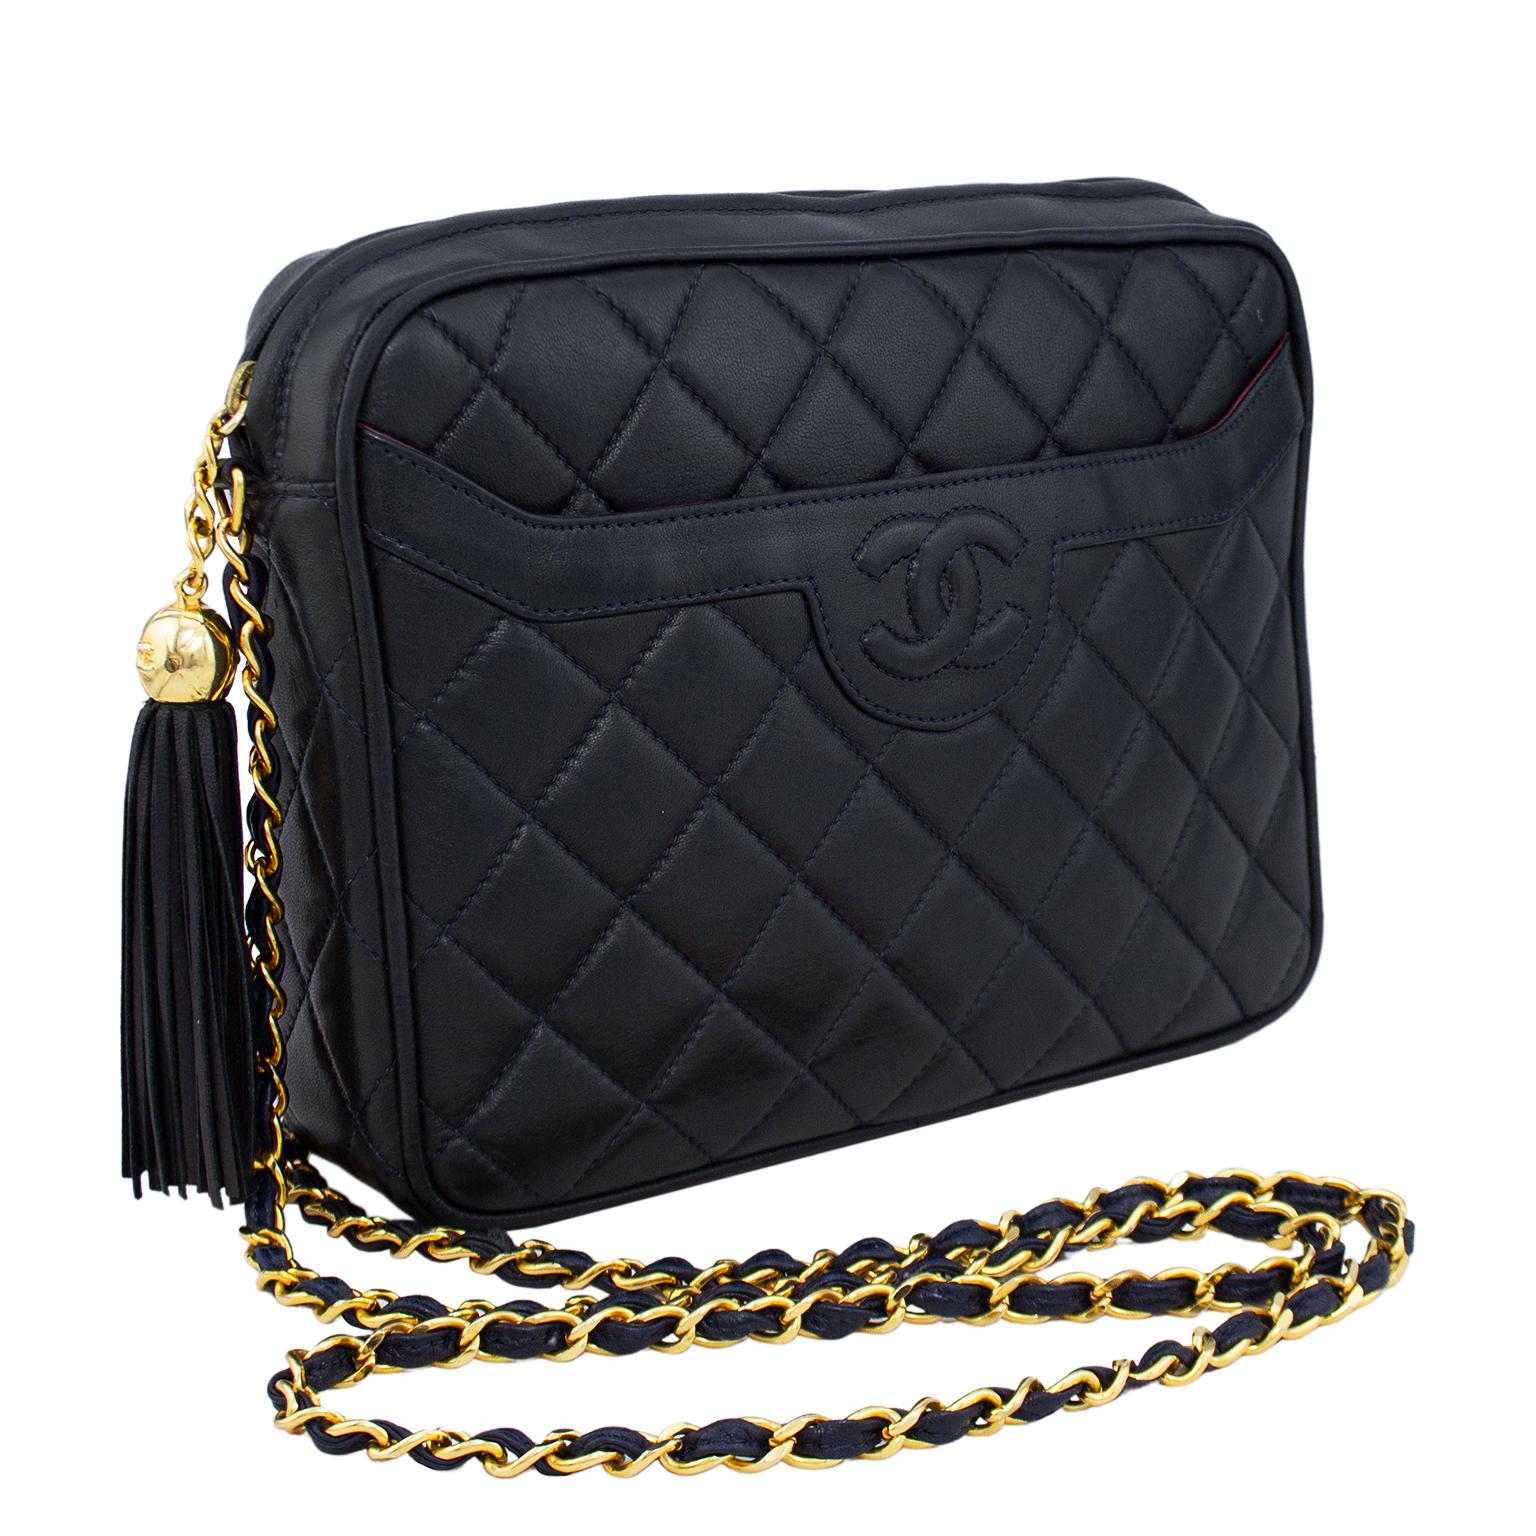 Classic is classic, and a Chanel camera bag never goes out of style. This bag dates from pre 1984 which is prior to serial numbers and hologram tags, and is the large version of the camera bag. Dark navy blue quilted lambskin leather with embossed